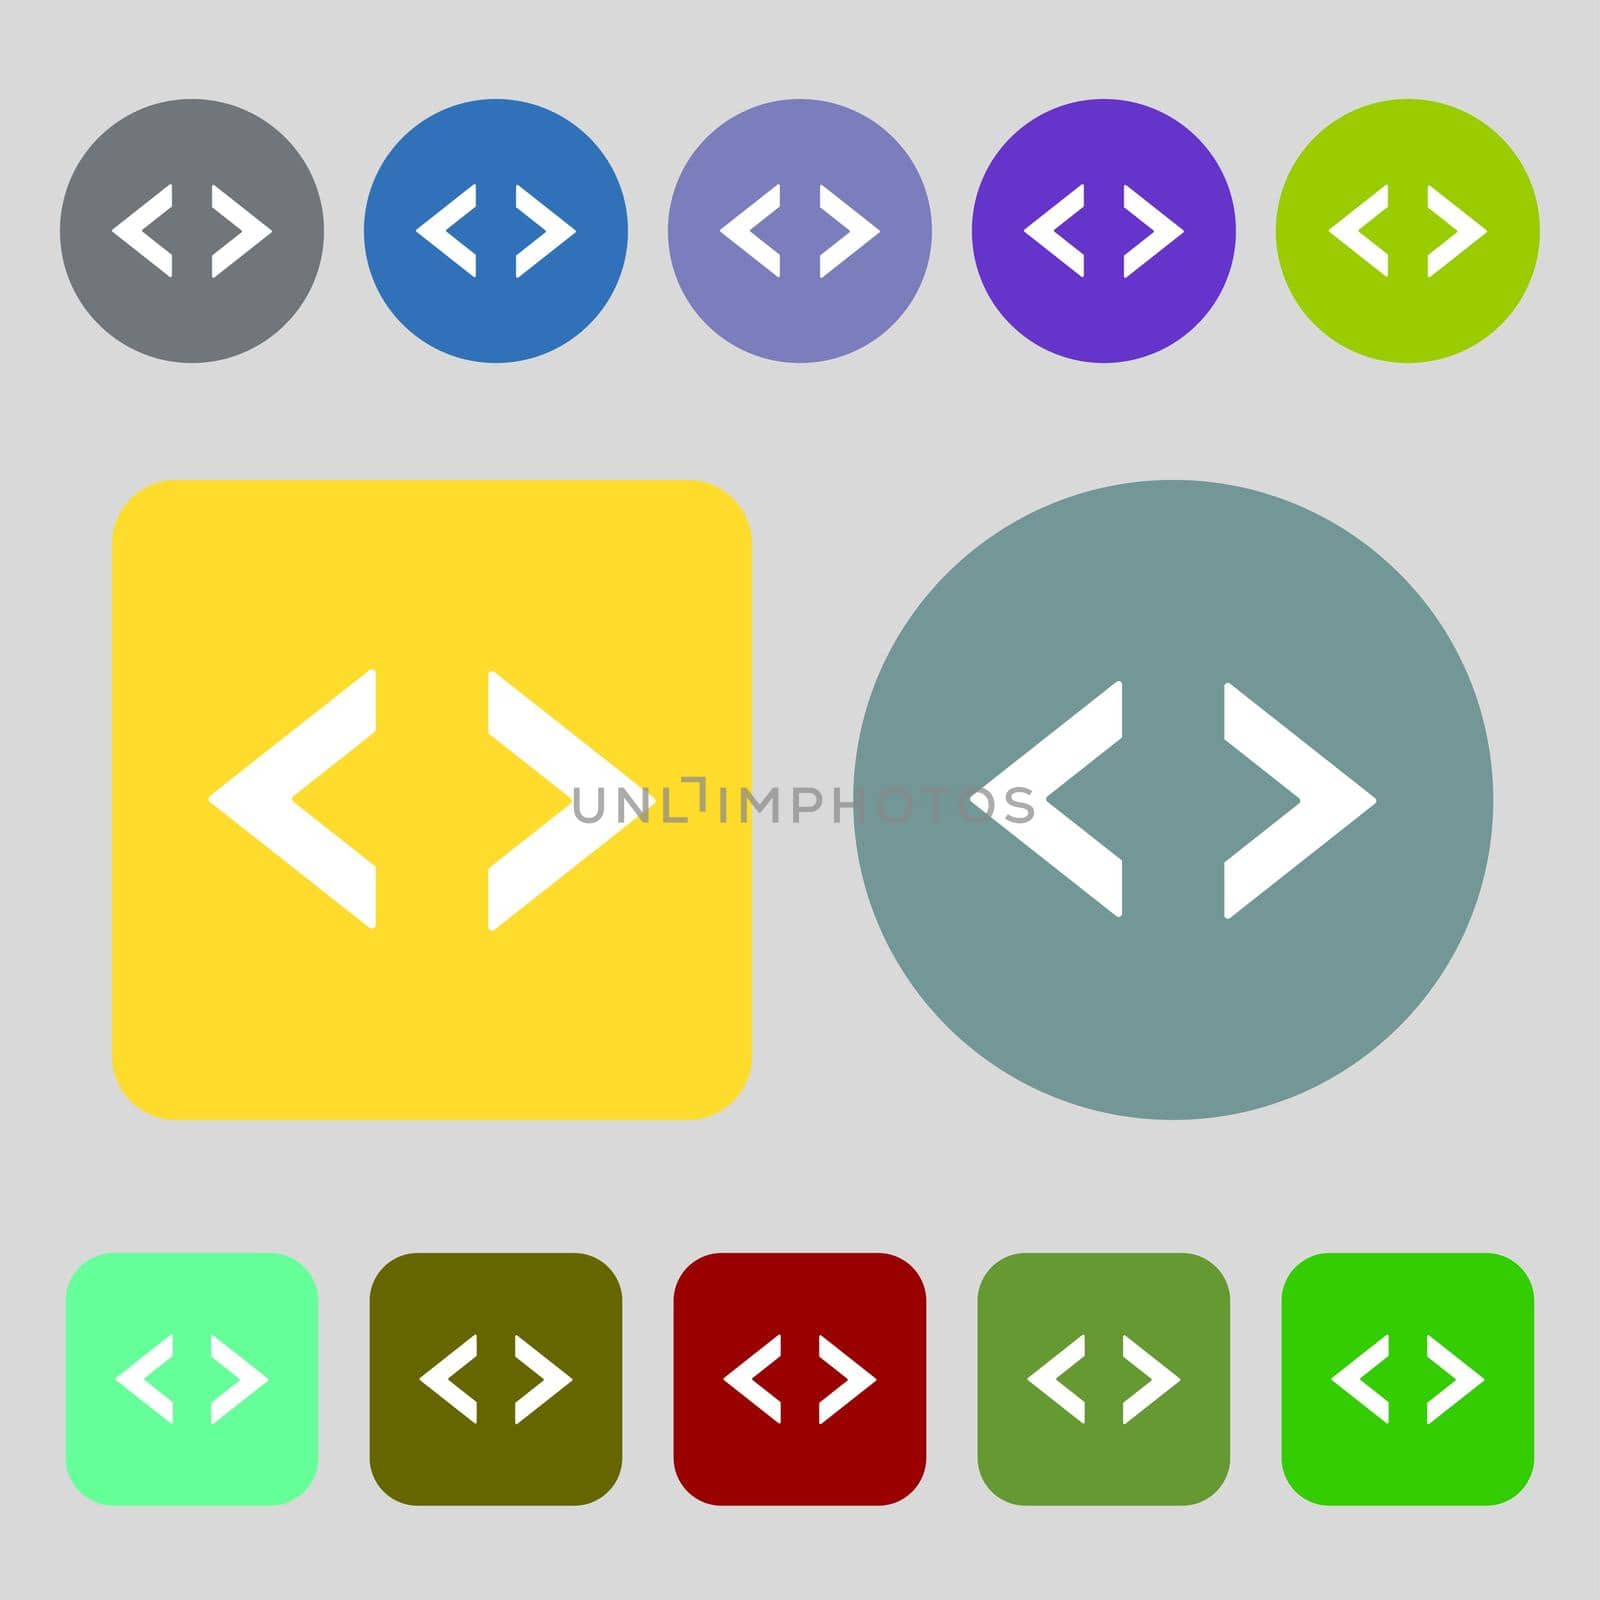 Code sign icon. Programmer symbol.12 colored buttons. Flat design. illustration